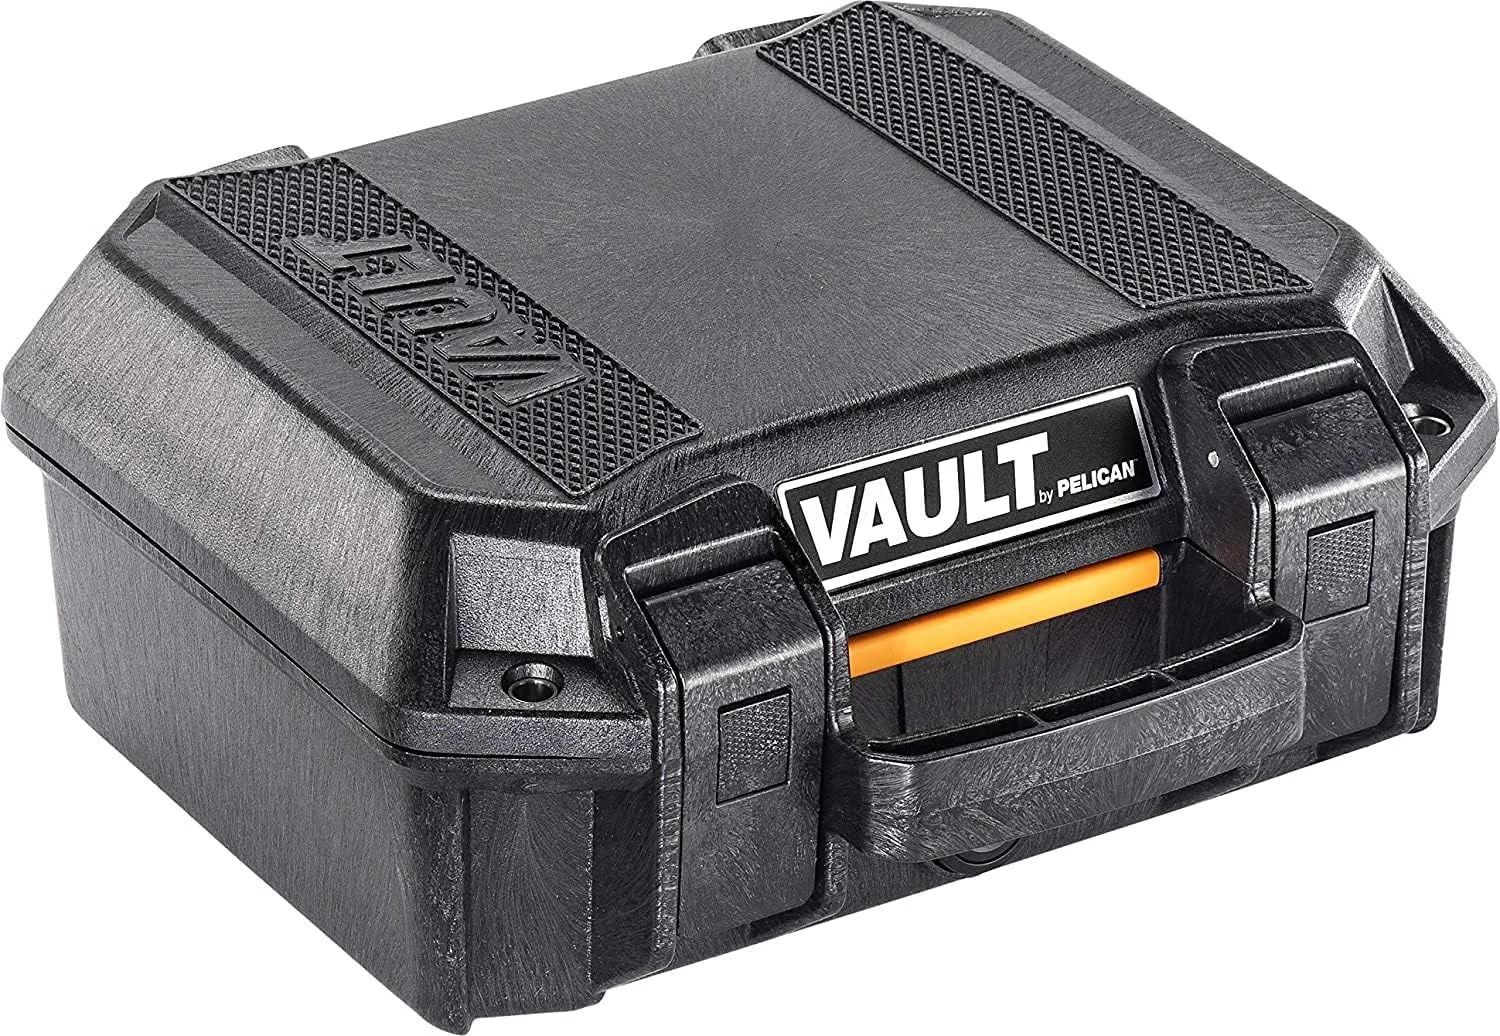 Vault by Pelican - V100 Multi-Purpose Hard Case with Padded Dividers for Camera